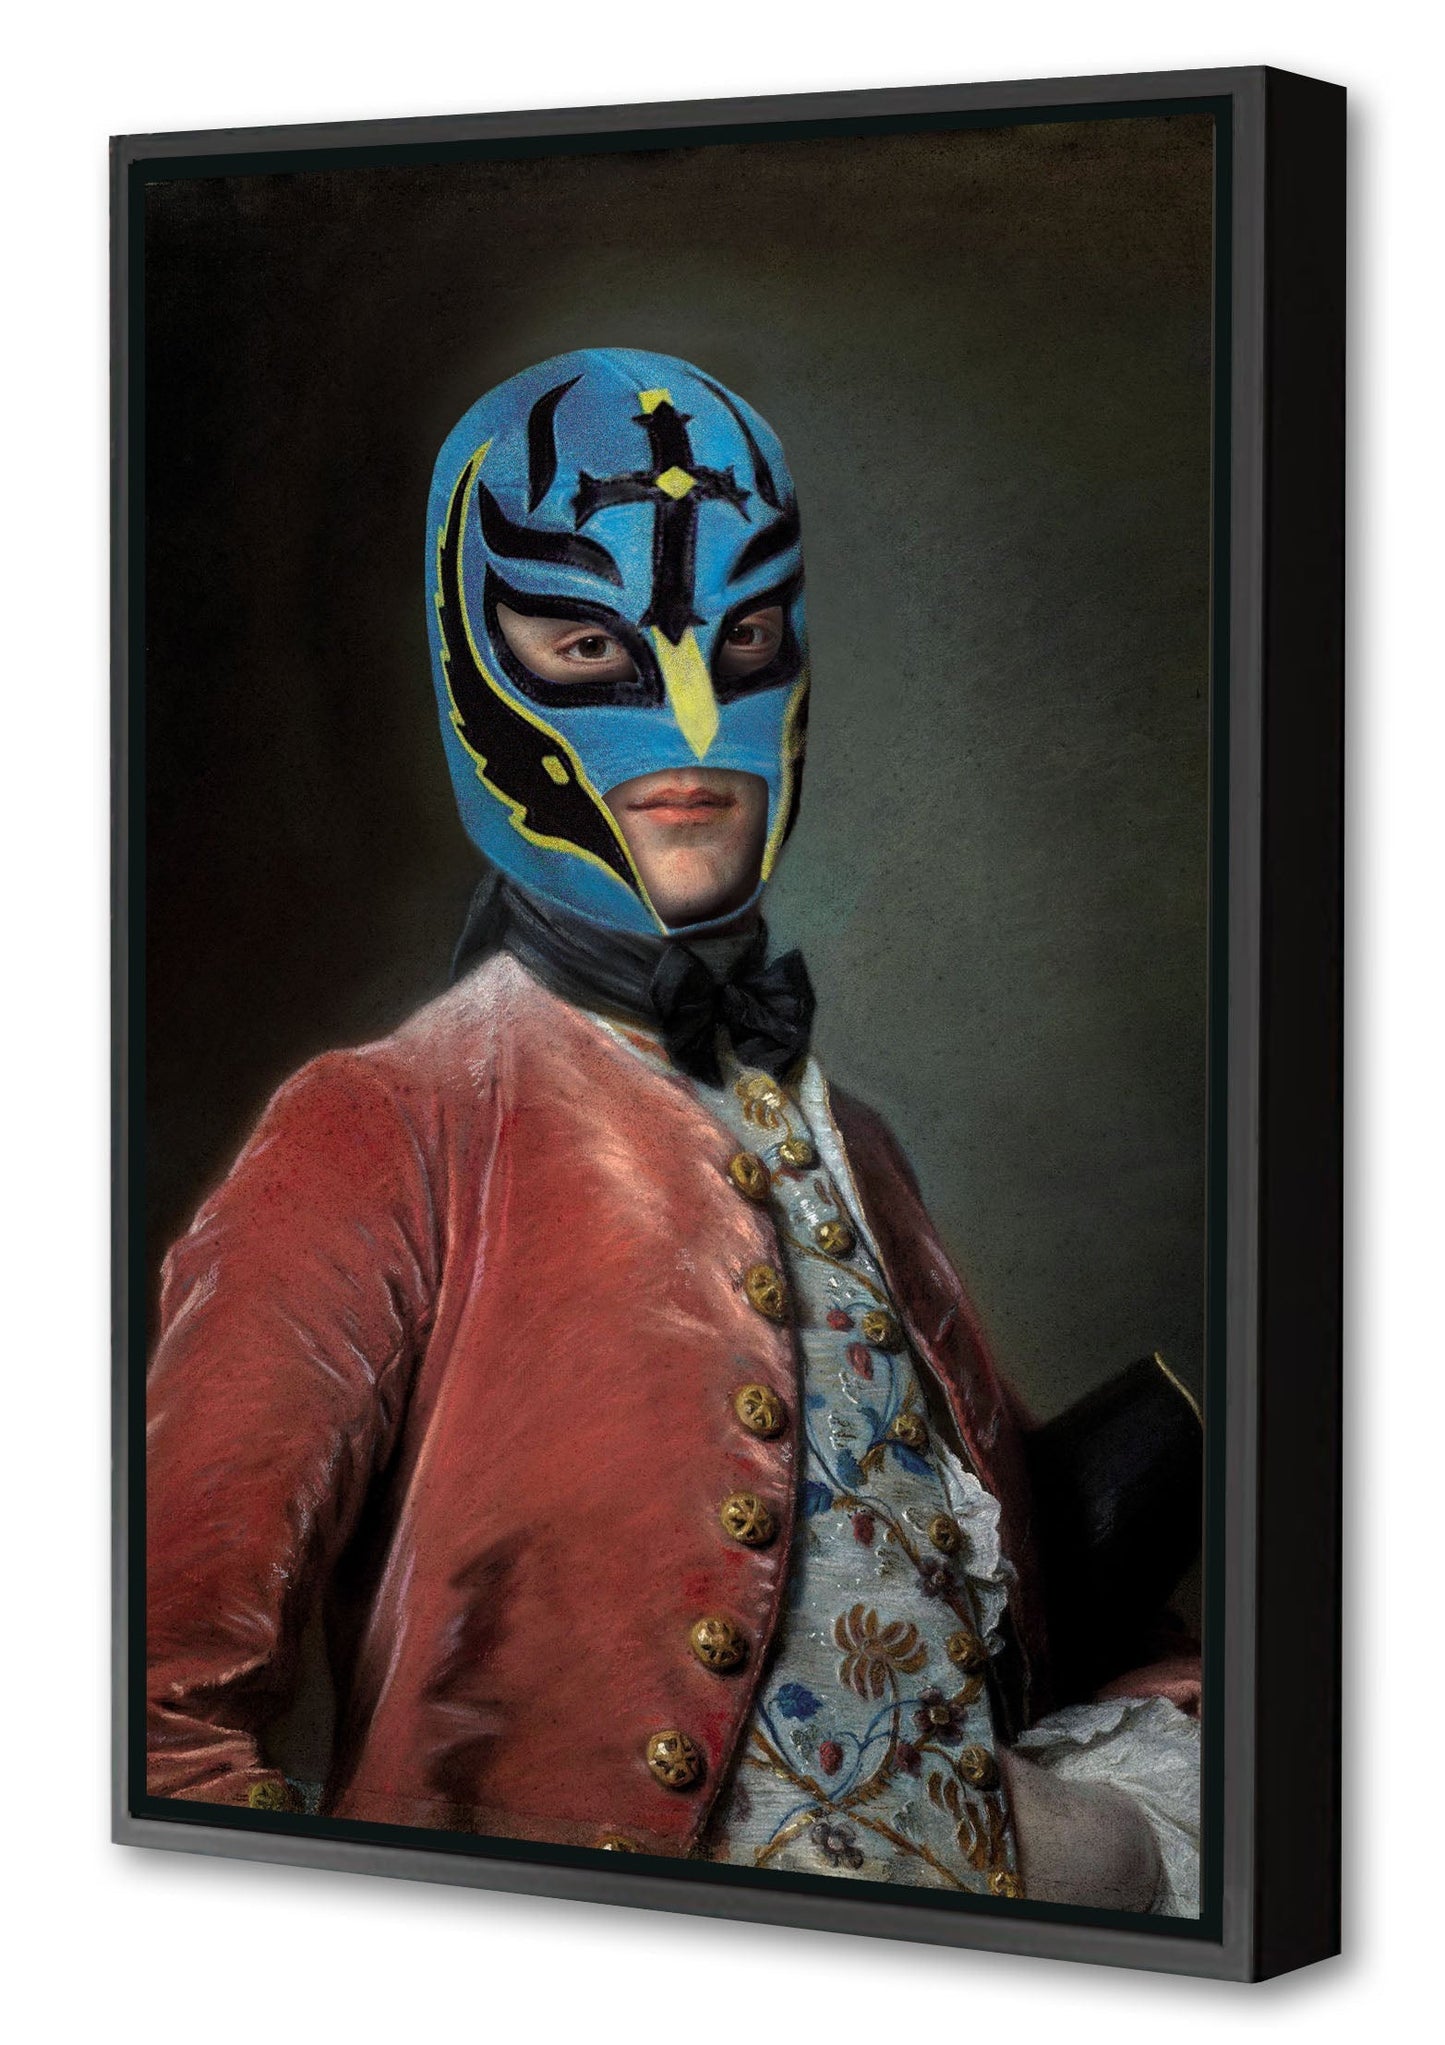 Fighter Blue-historical, print-Canvas Print with Box Frame-40 x 60 cm-BLUE SHAKER